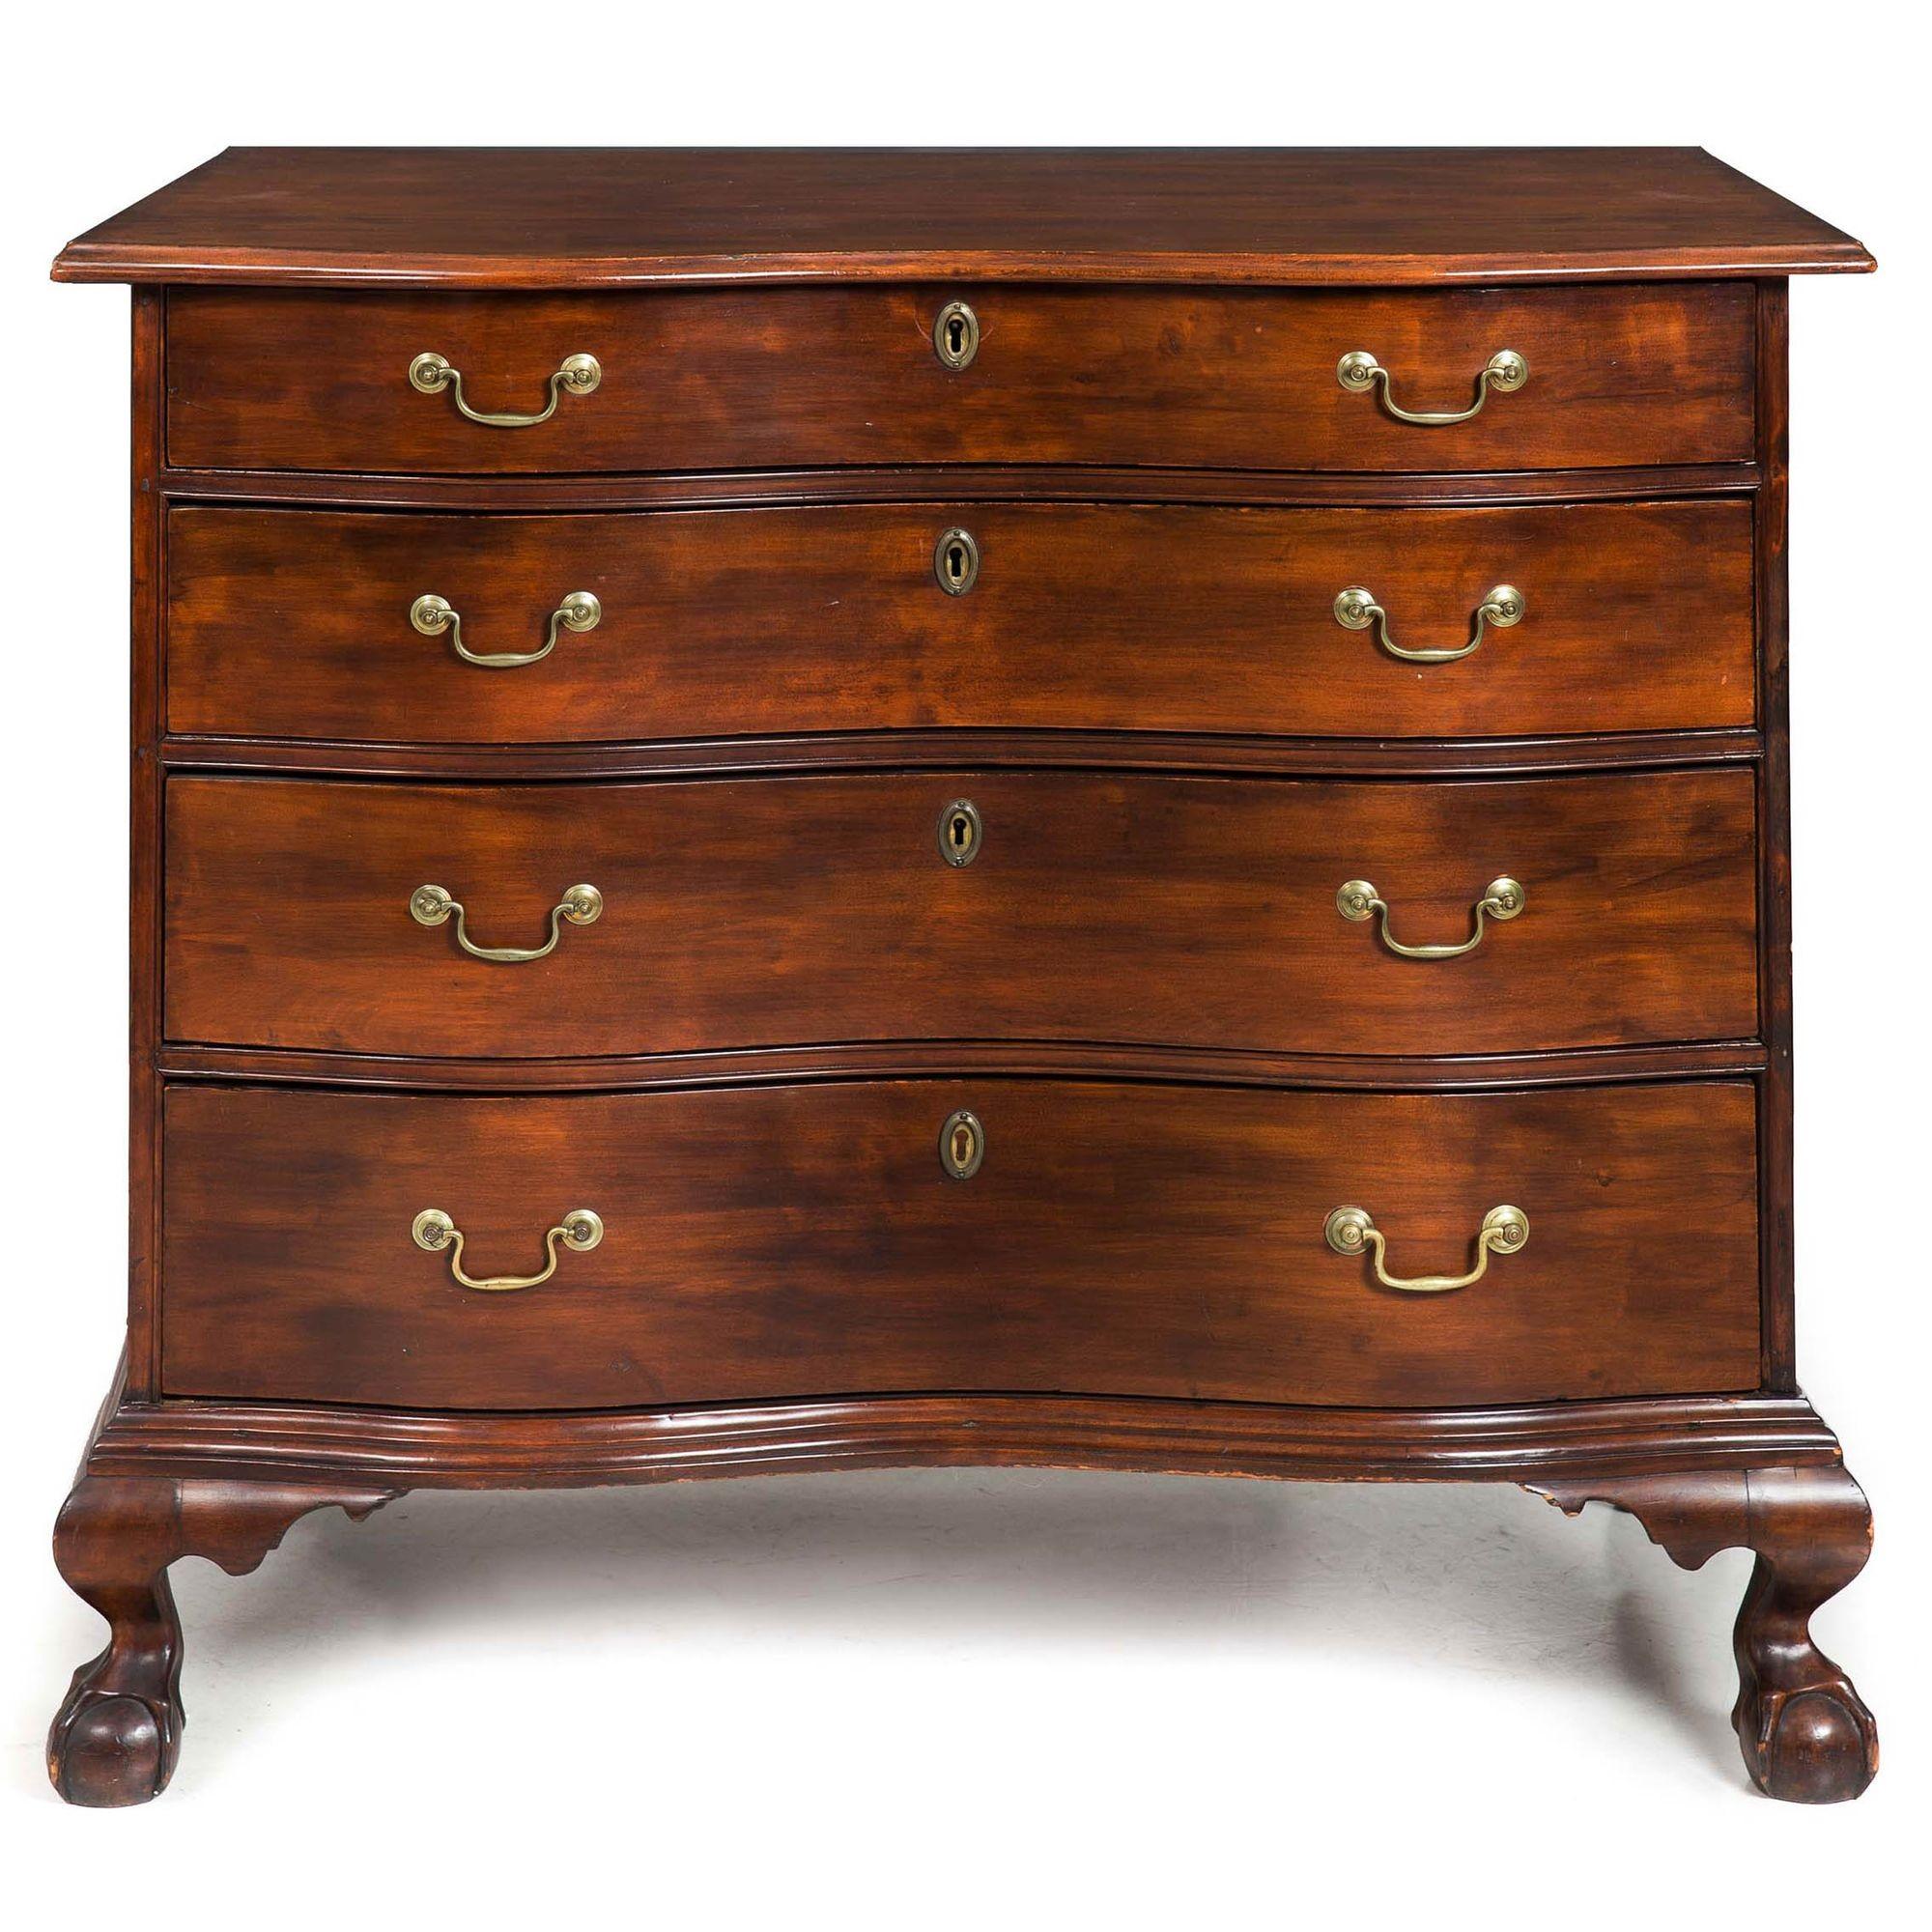 CHIPPENDALE MAHOGANIZED-BIRCHWOOD REVERSE SERPENTINE CHEST OF DRAWERS
Massachusetts, probably Boston  circa 1780  retaining original brasses and resting over ball-and-claw feet
Item # 209JSW16Z 

A very fine reverse-serpentine (also known as